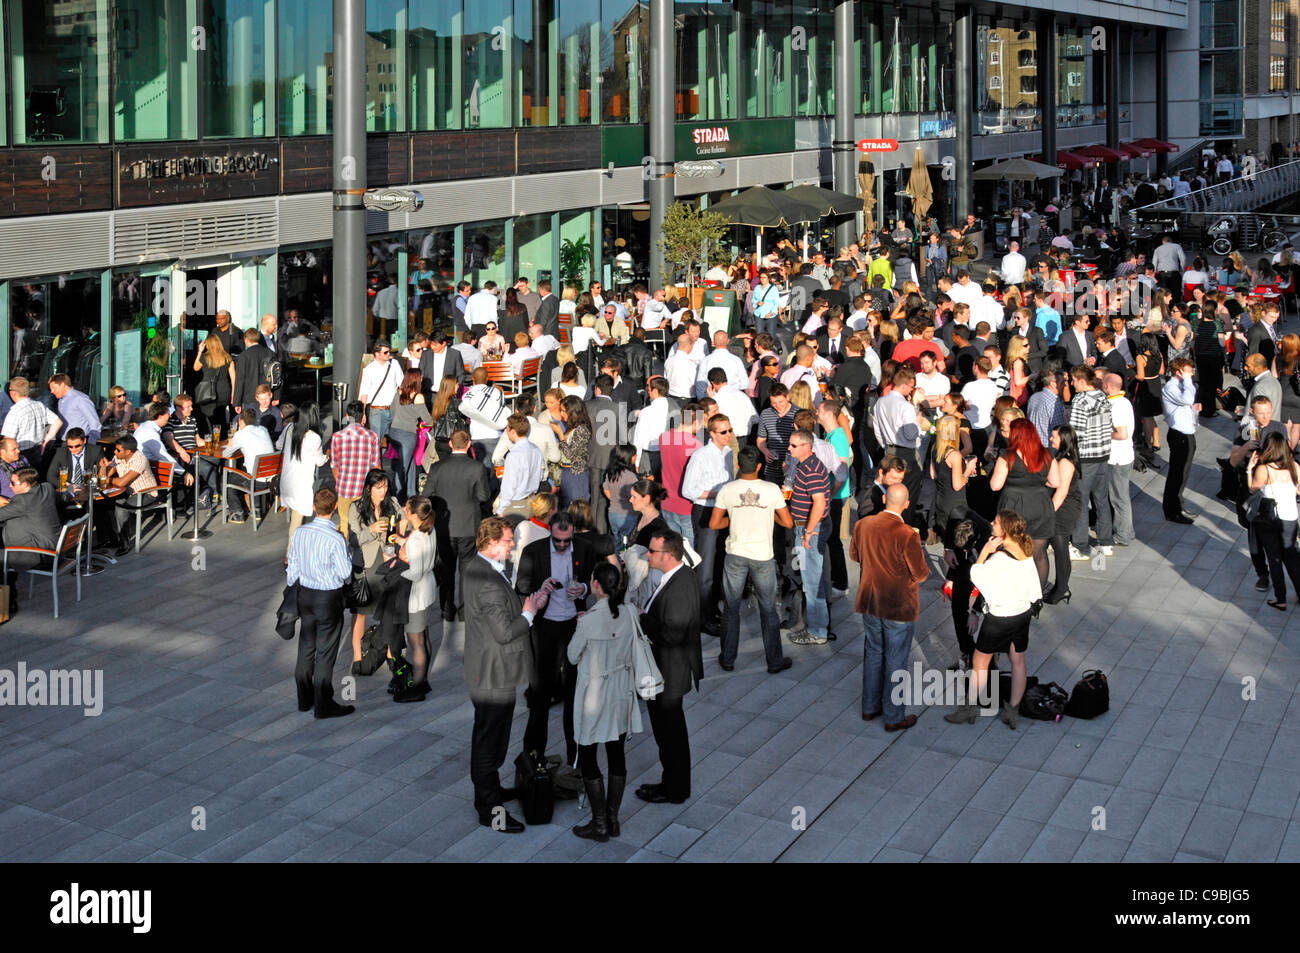 Aerial view of crowd of office workers after work lifestyle drinks group of people socialising outside busy bar business St Katharines Dock London UK Stock Photo